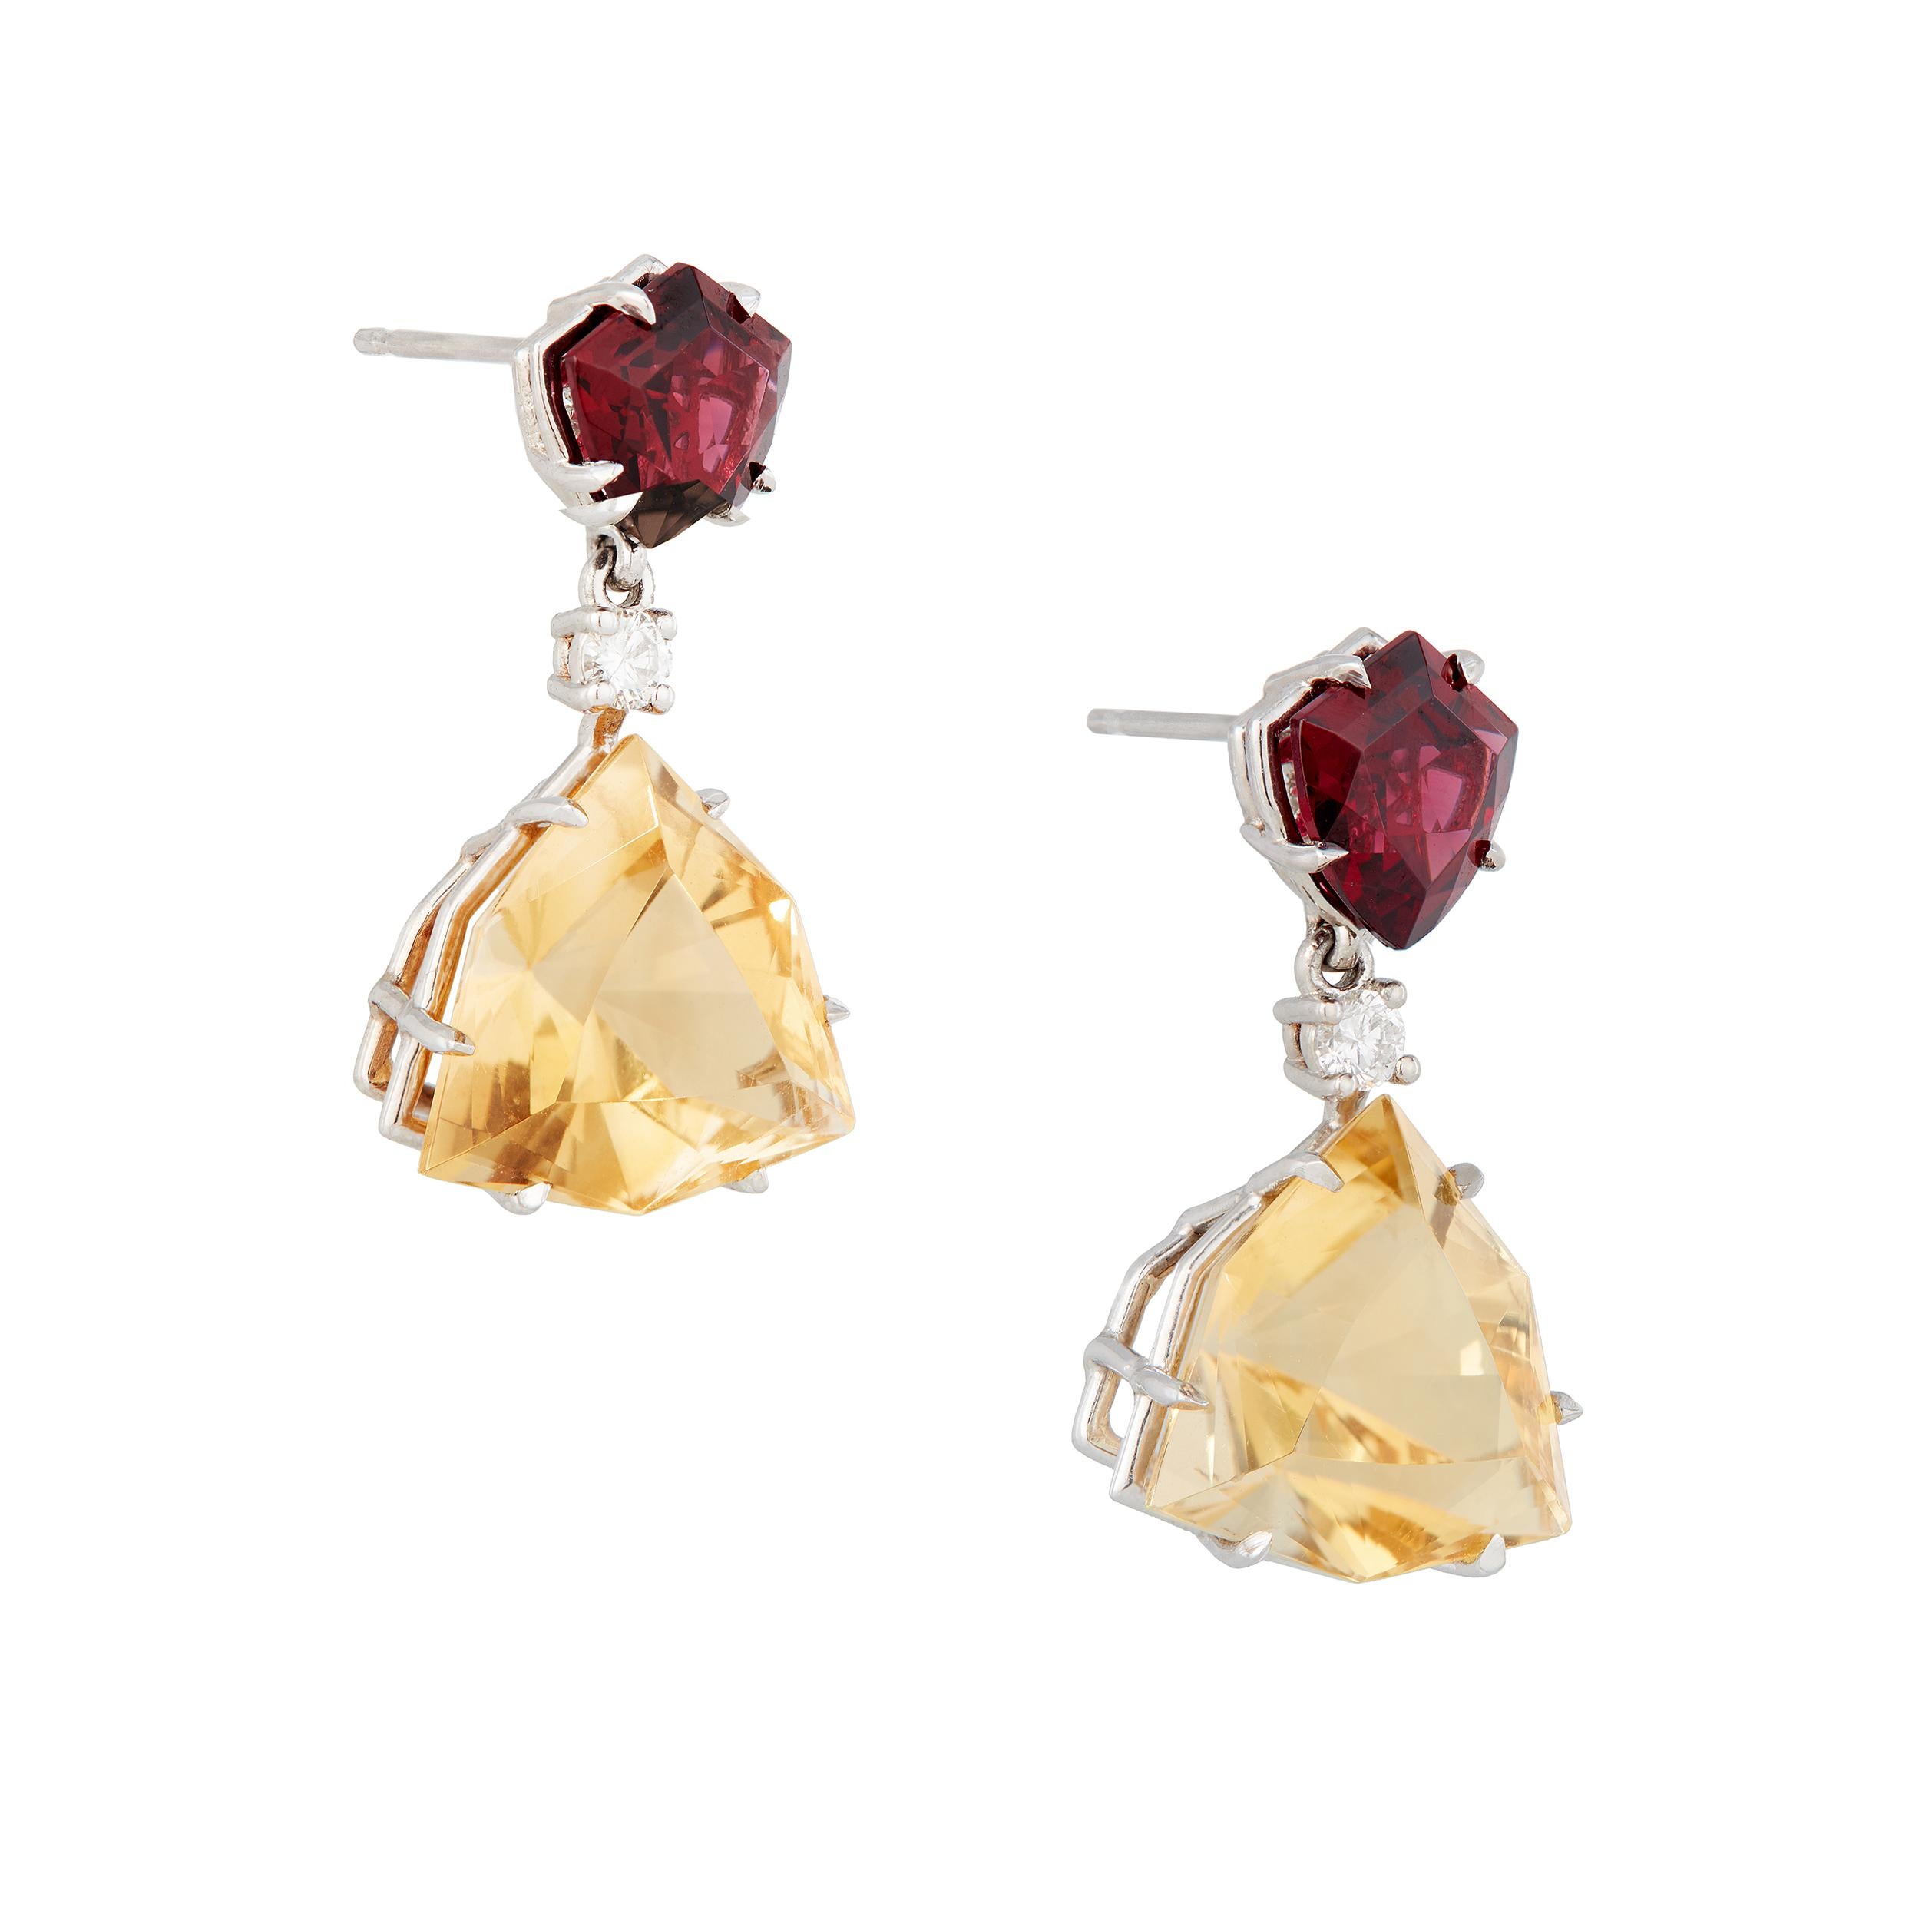 With Modified Shield-shaped gemstones, these earrings have their own kind of noble and powerful presence. The color combination of Garnet  and this Honey-colored Citrine are sublime together.

Shield-shaped Garnets (2) 2.9 Carats
Modified